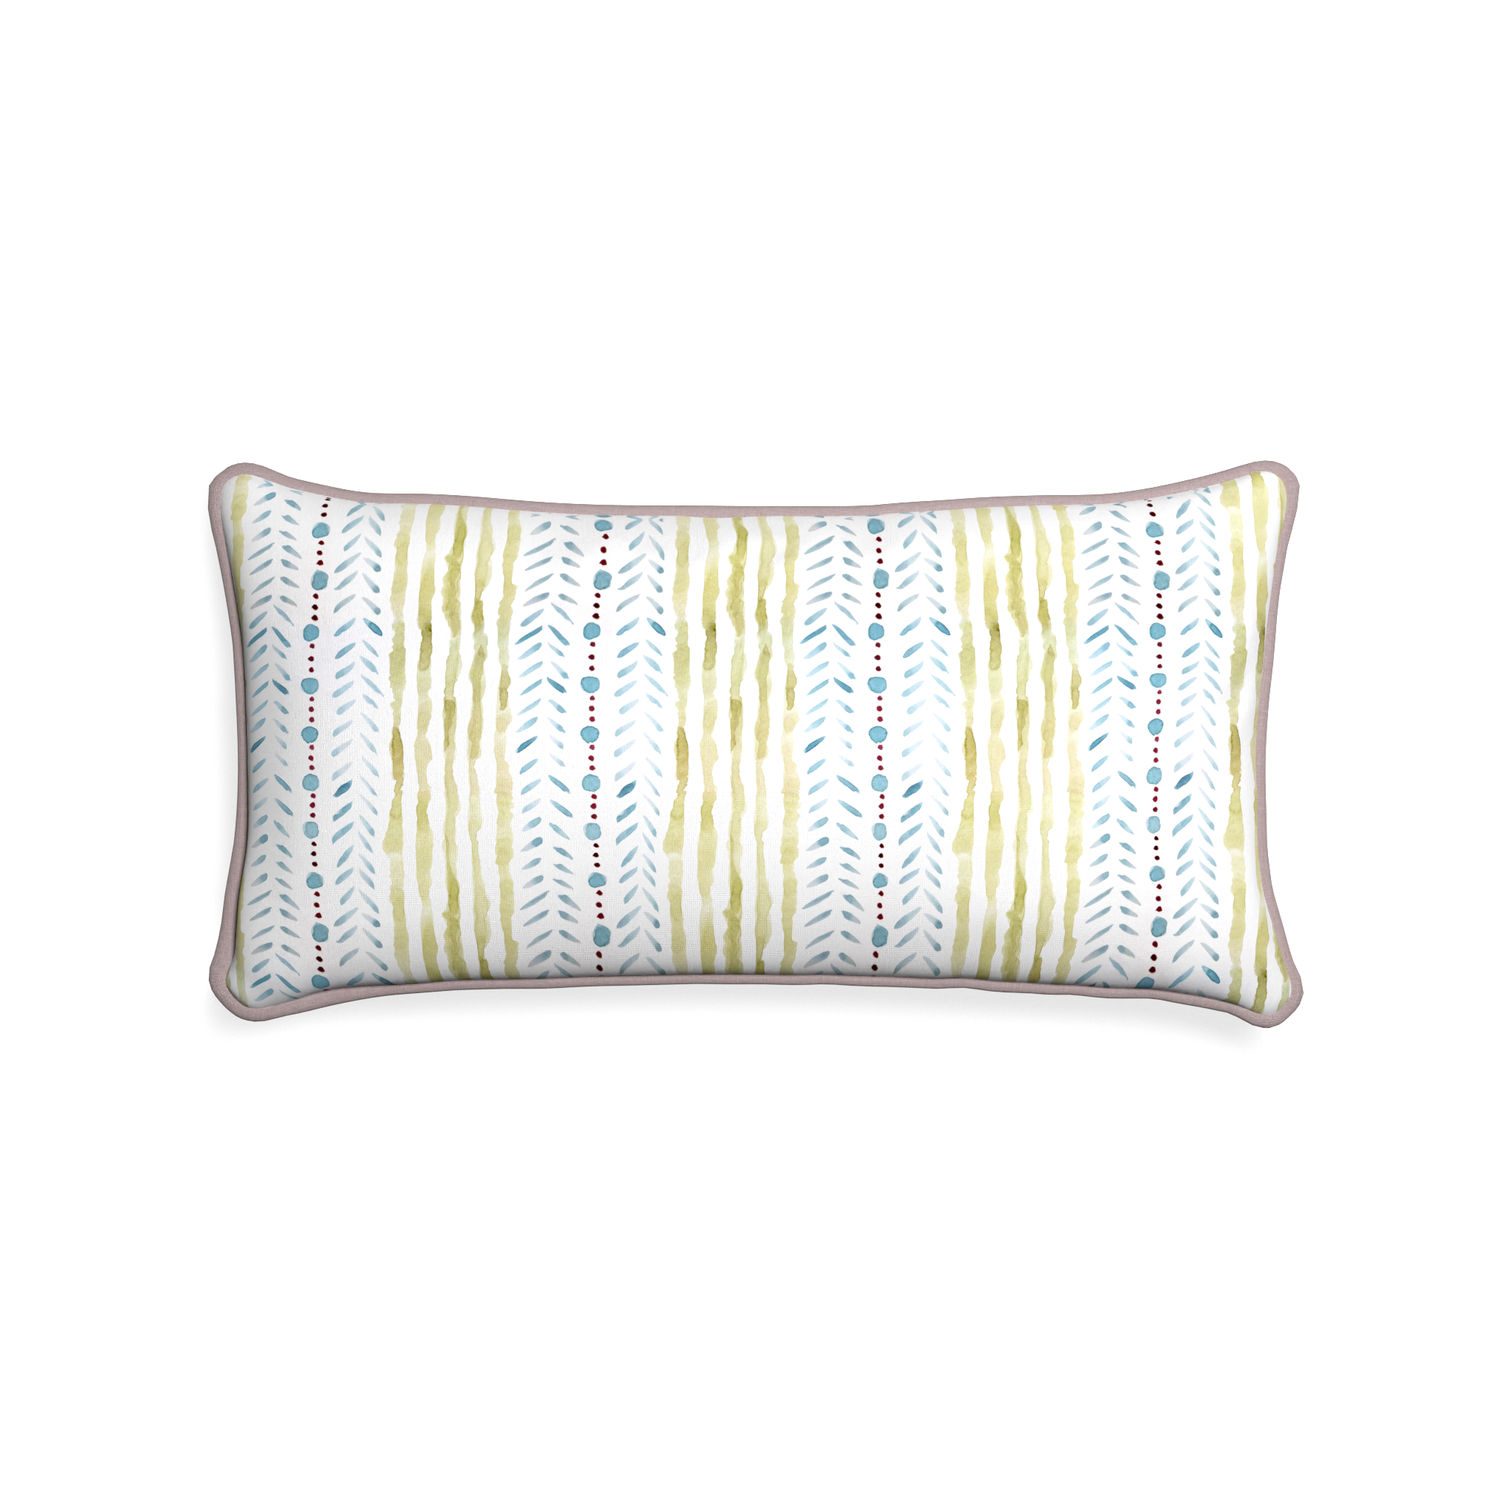 Midi-lumbar julia custom blue & green stripedpillow with orchid piping on white background